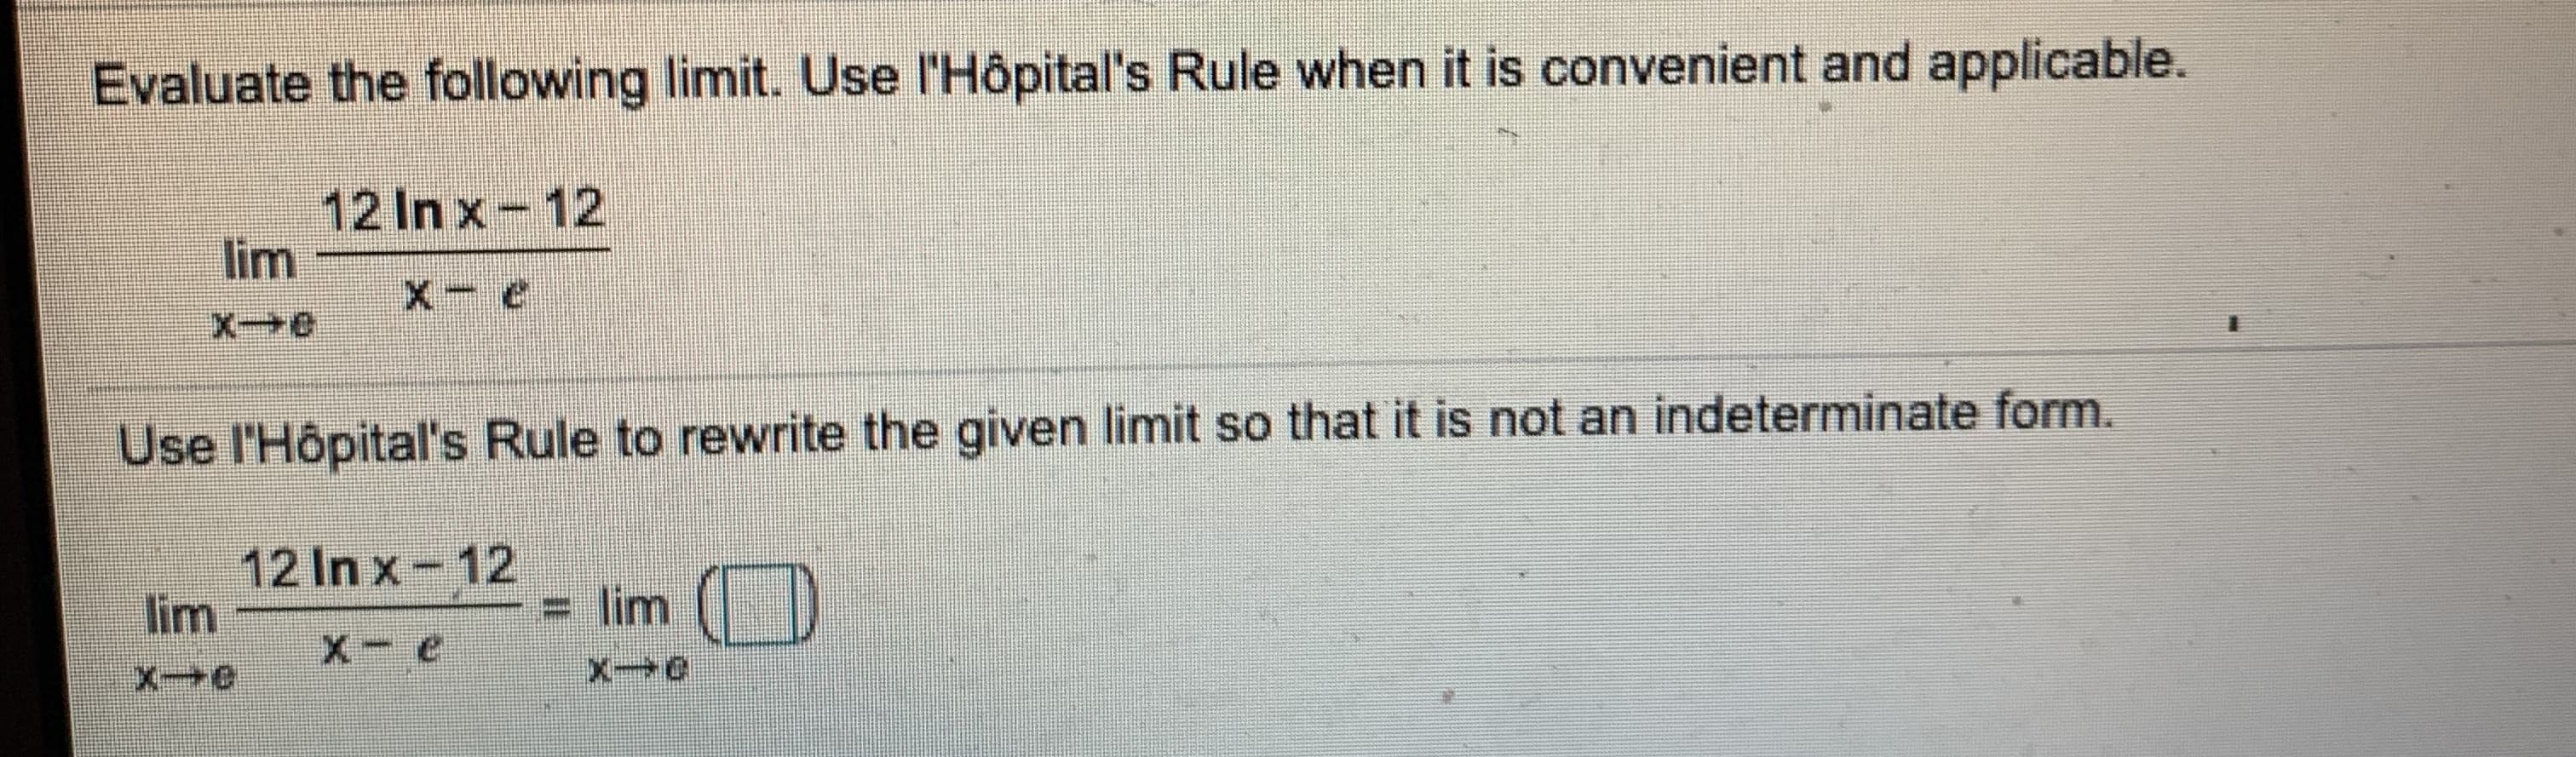 Evaluate the following limit. Use l'Hôpital's Rule when it is convenient and applicable.
12 In x-12
lim
X-e
